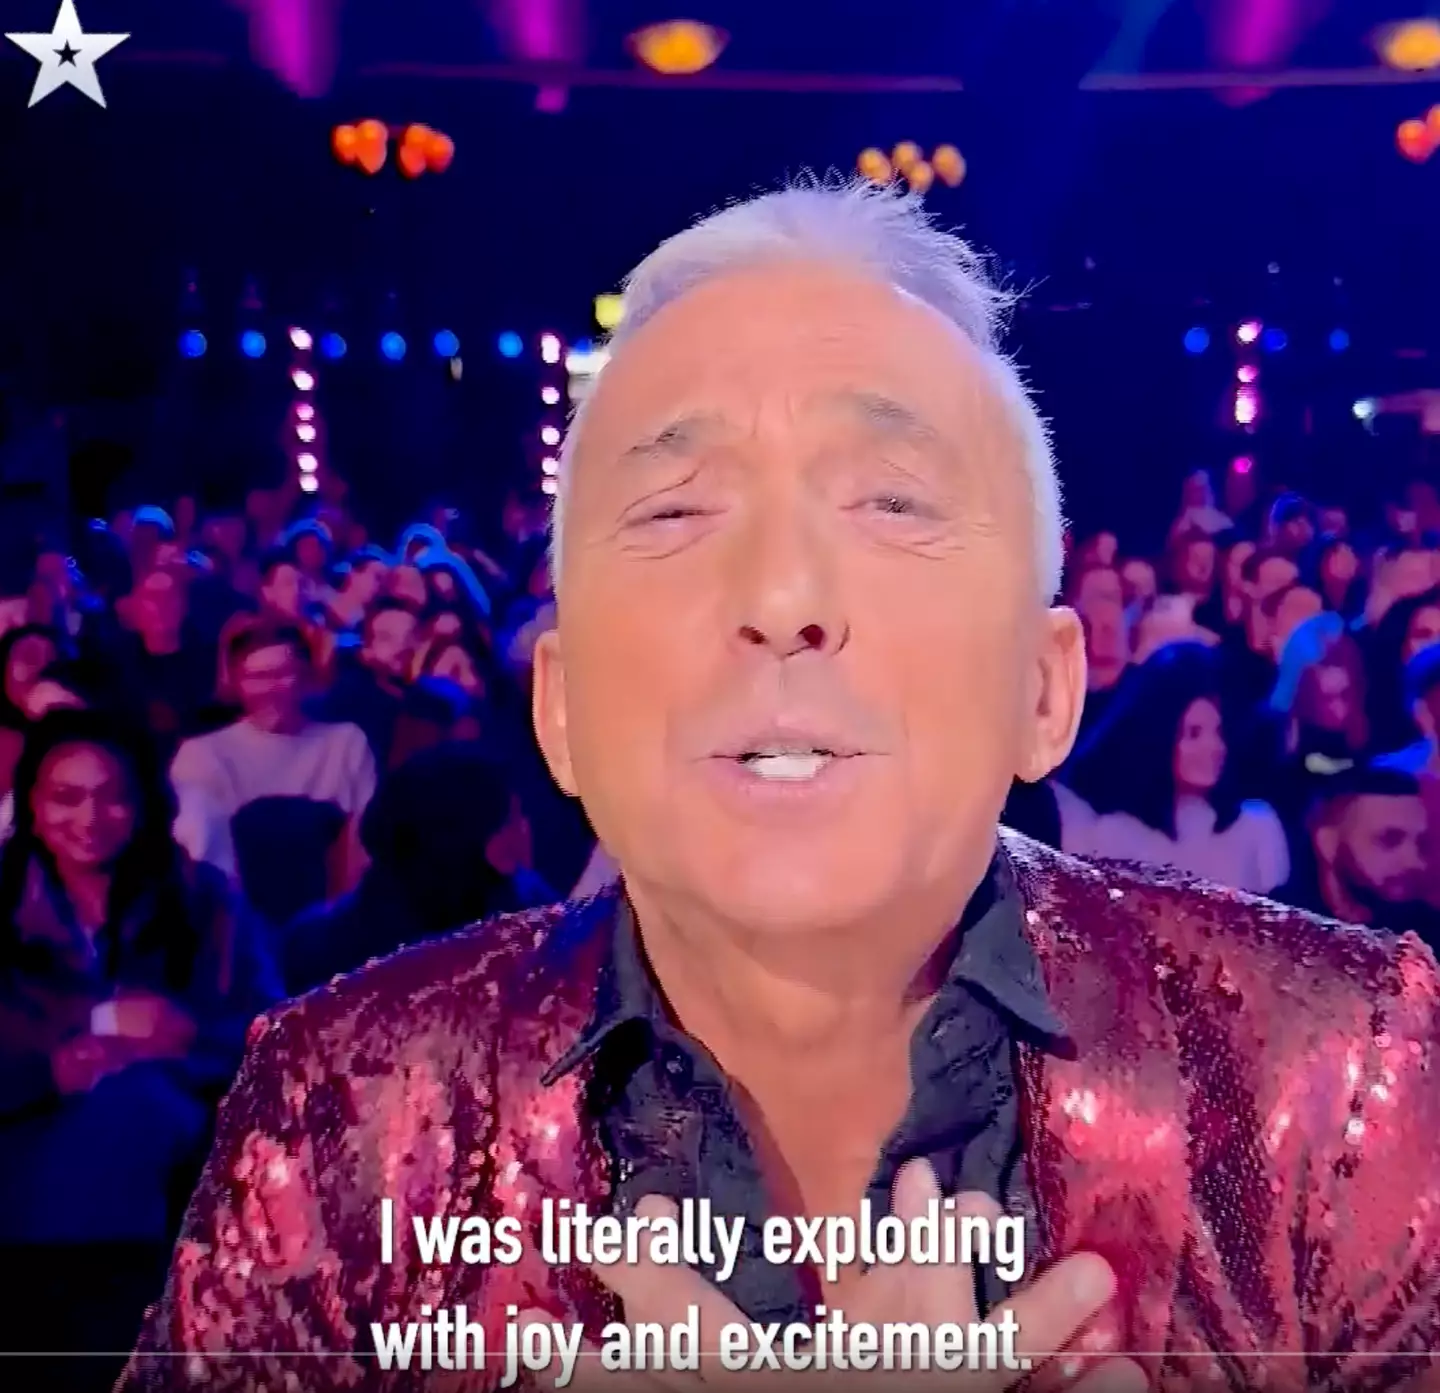 Despite now being a judge on the show, Tonioli had never watched BGT before.